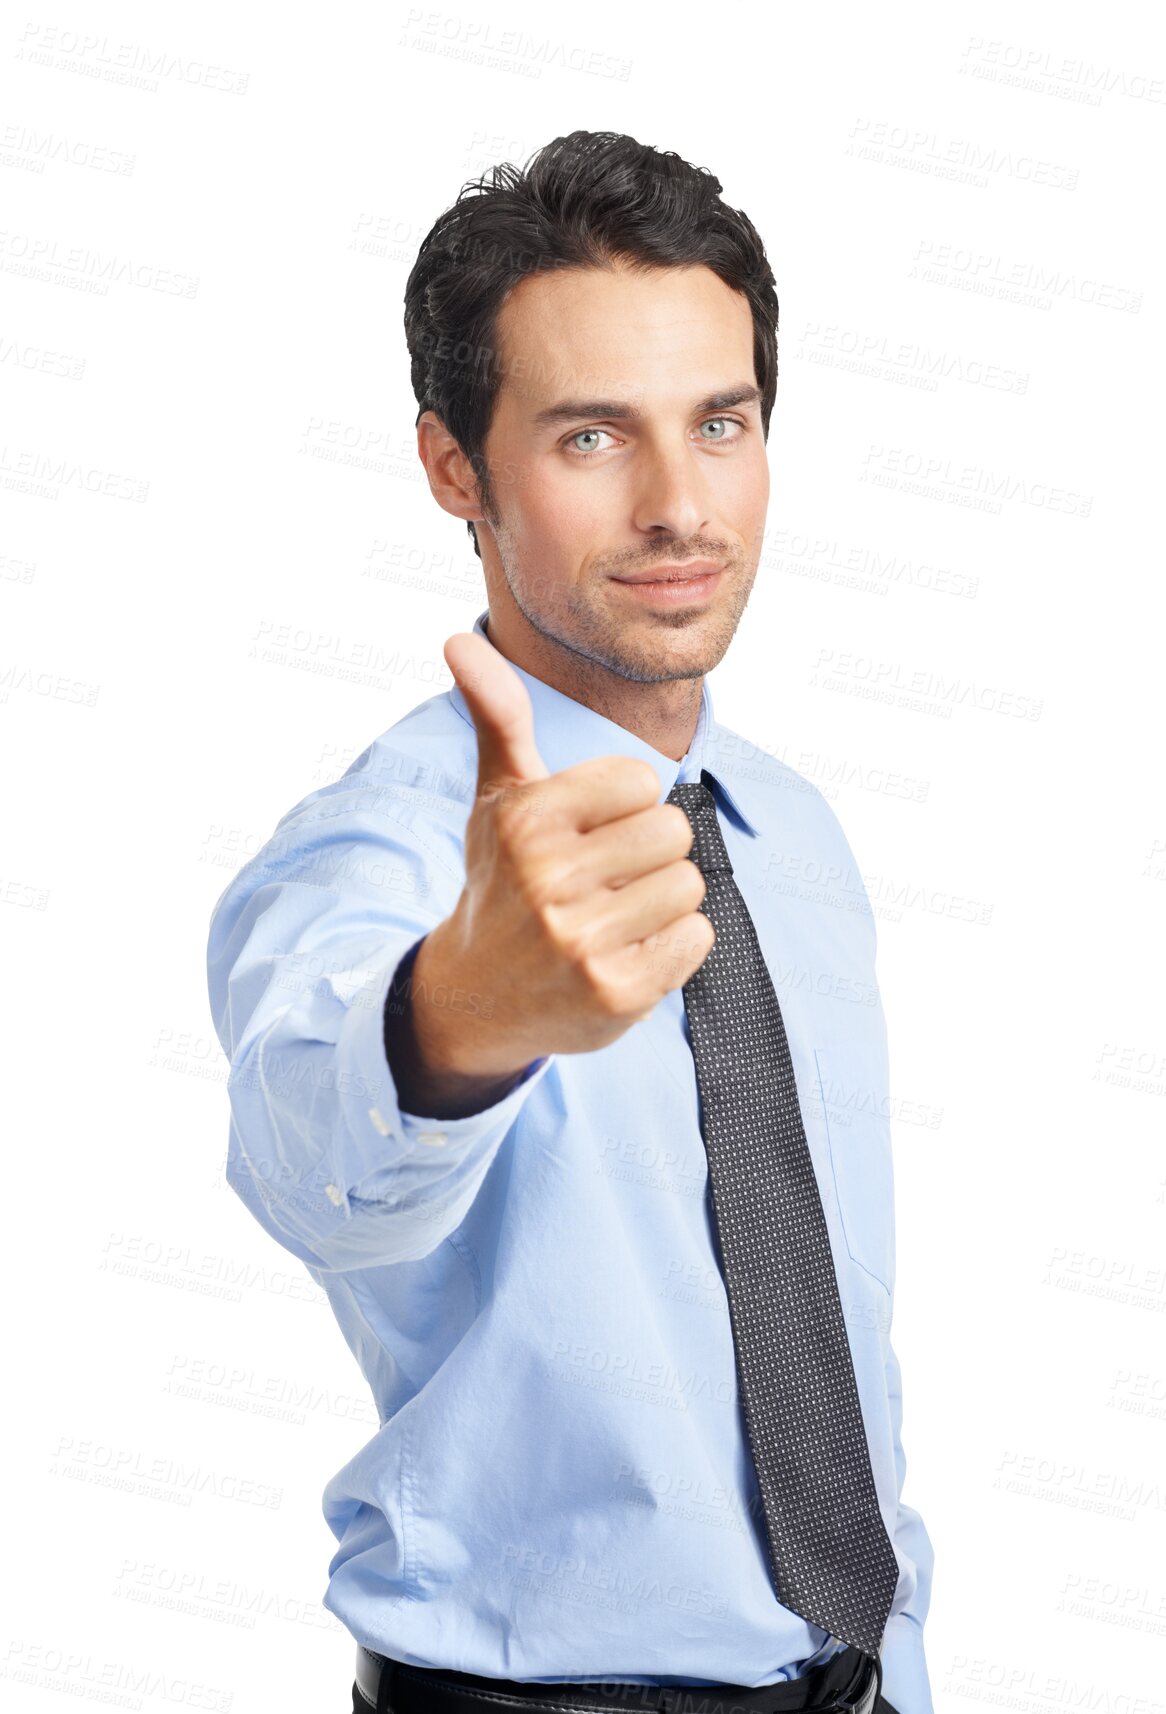 Buy stock photo Portrait, business and man with support, thumbs up and consultant isolated against a transparent background. Male person, employee or entrepreneur with a hand gesture, agreement or promotion with png